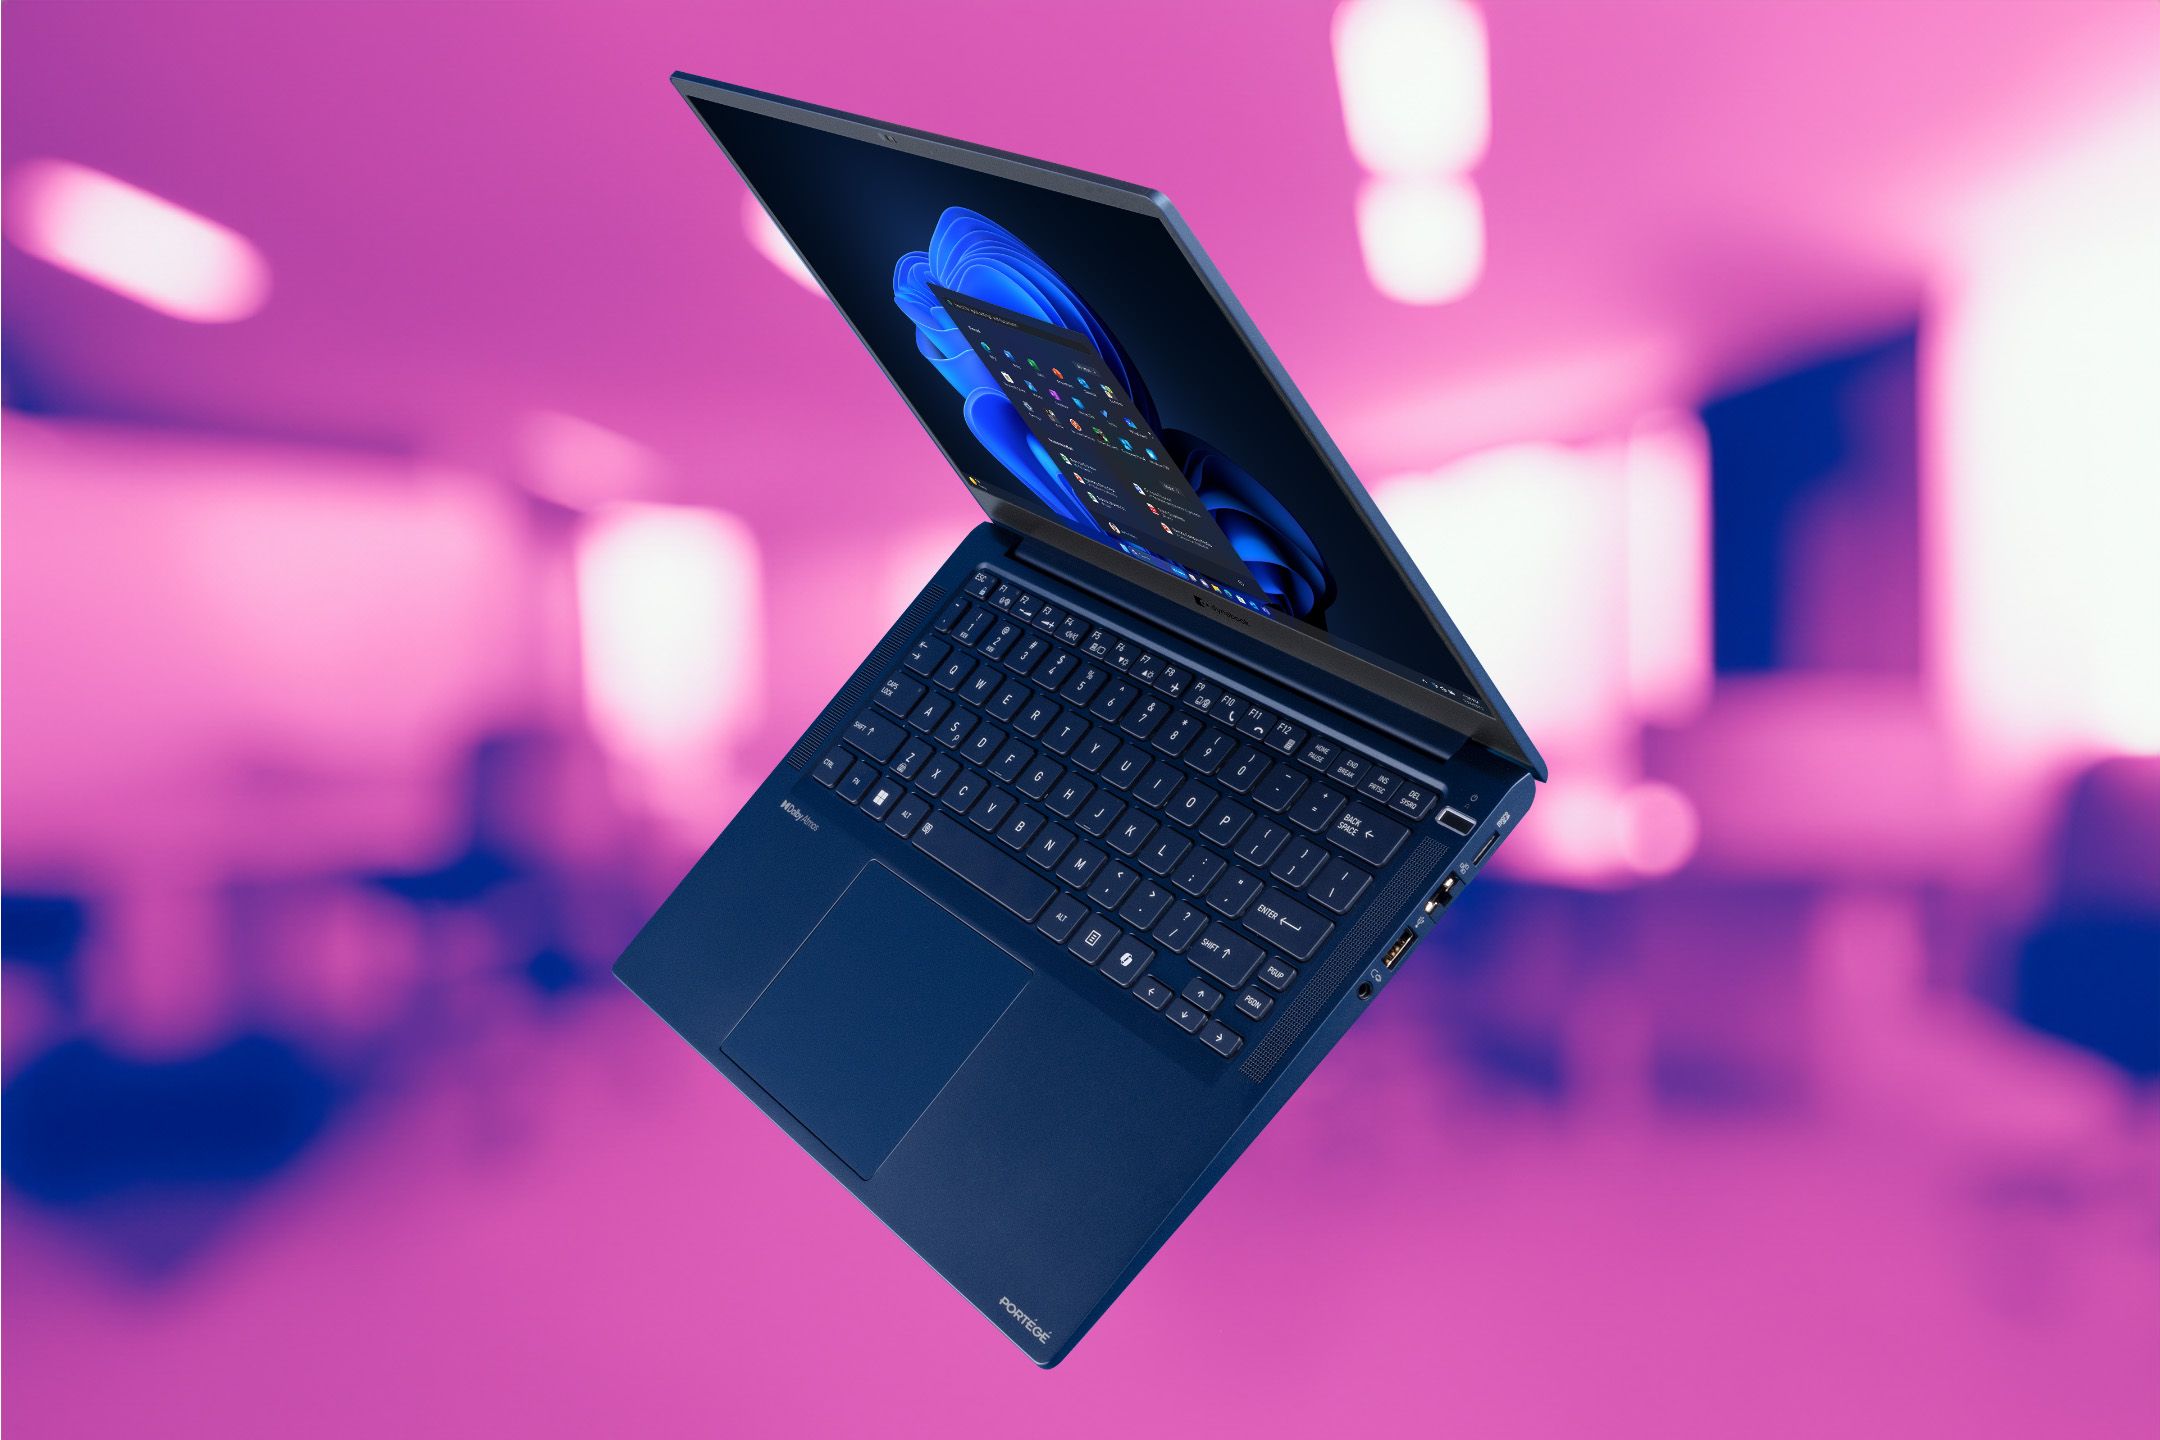 Dynabook Portege X40L-M over a pink-tinted office background